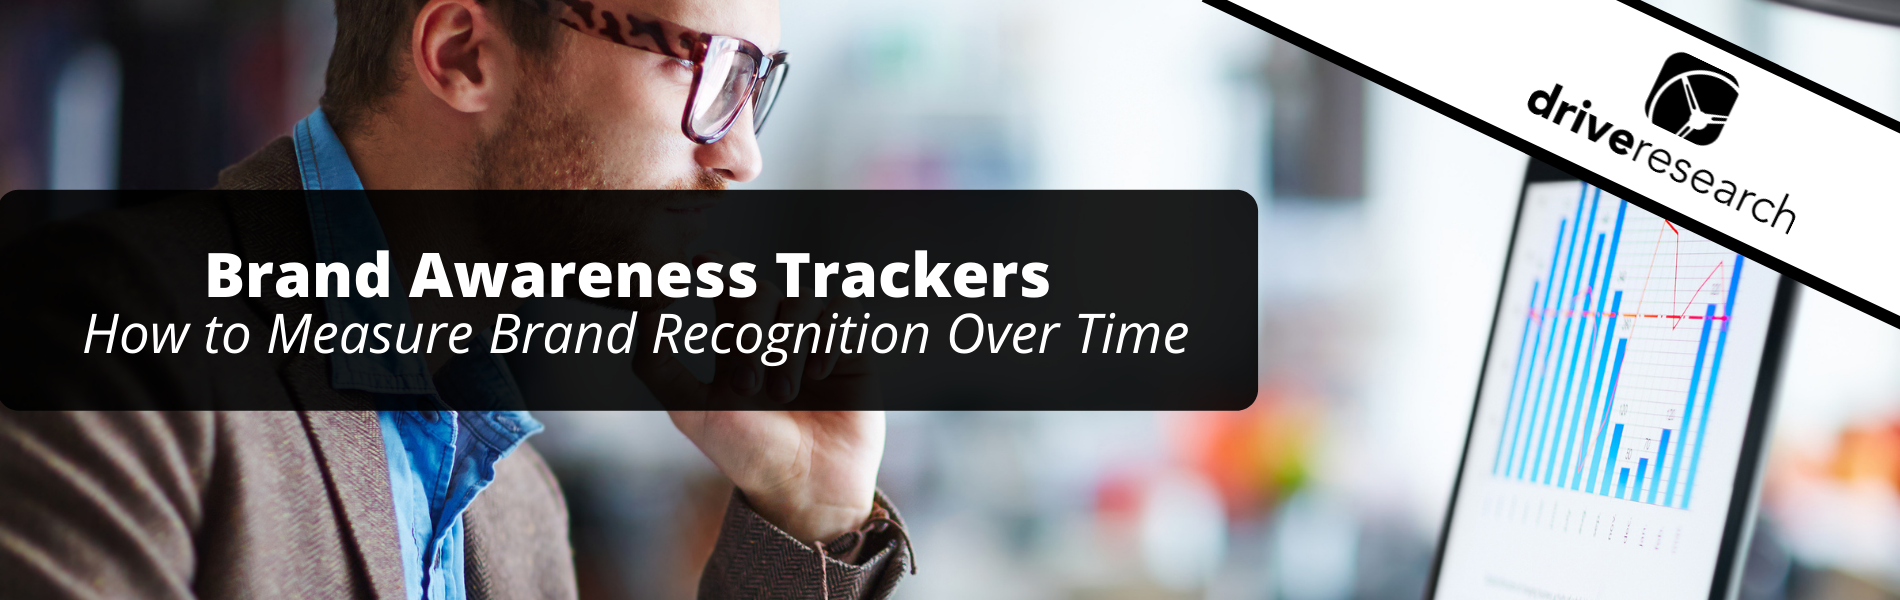 Brand Awareness Trackers: How to Measure Brand Recognition Over Time